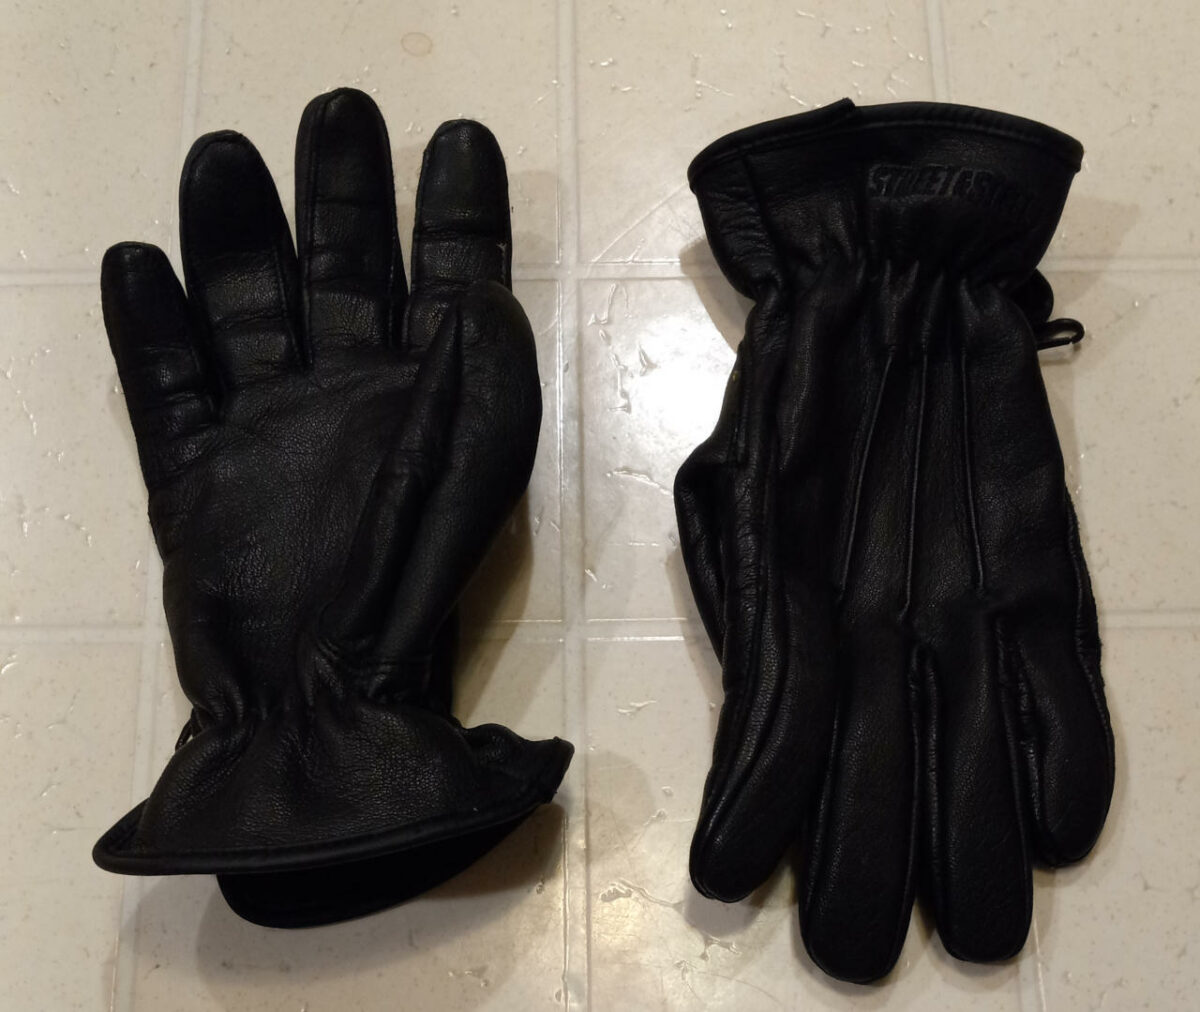 Wear A Motorcycle Gloves All The Time? - My Street & Steel Leather Motorcycle Gloves.